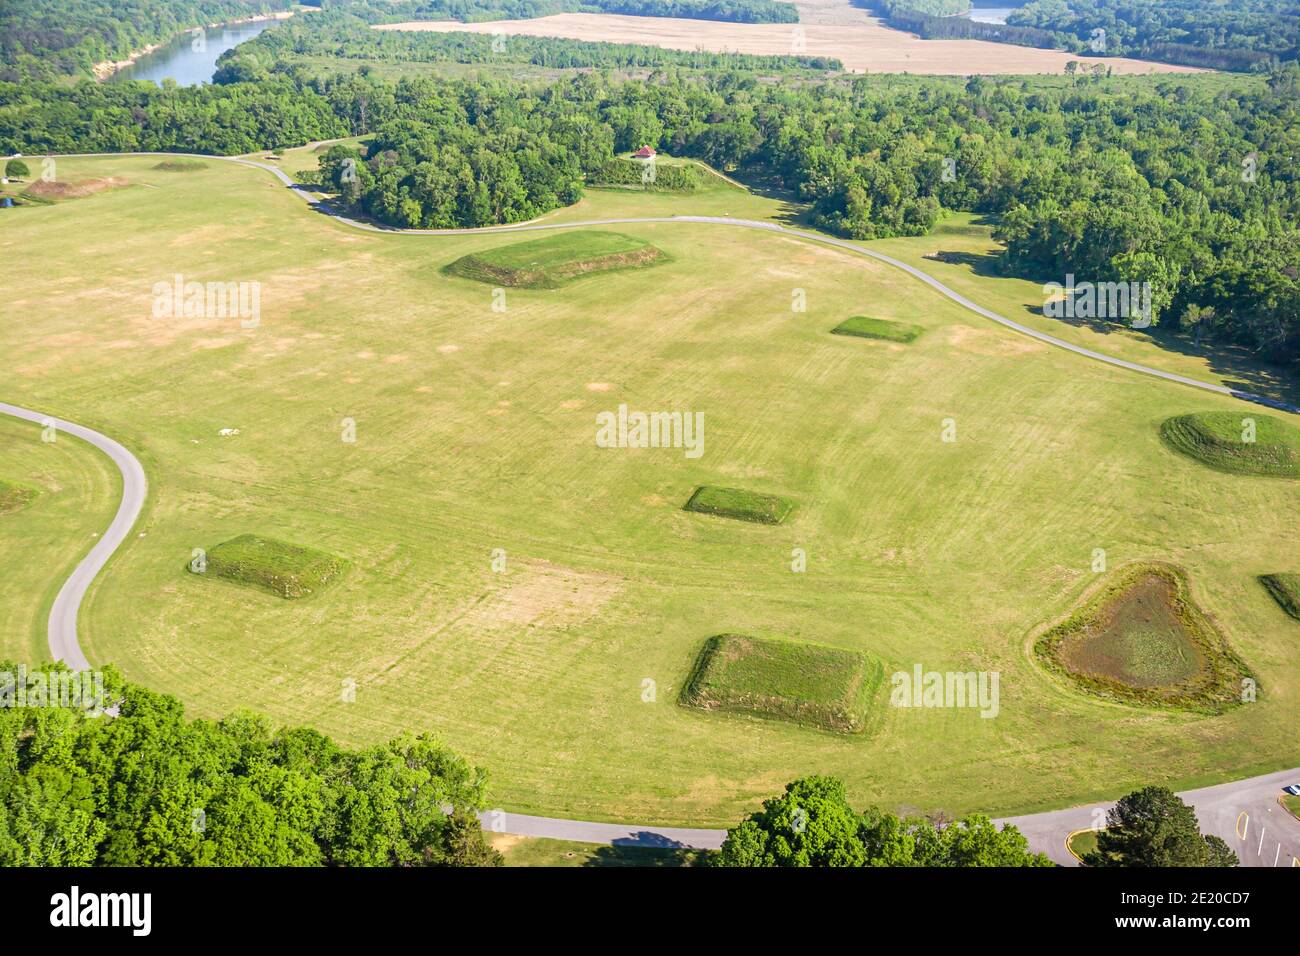 Alabama Moundville Archaeological Park Site,Middle Mississippian,Native American Indian village,aerial overhead view from above platform mound mounds Stock Photo